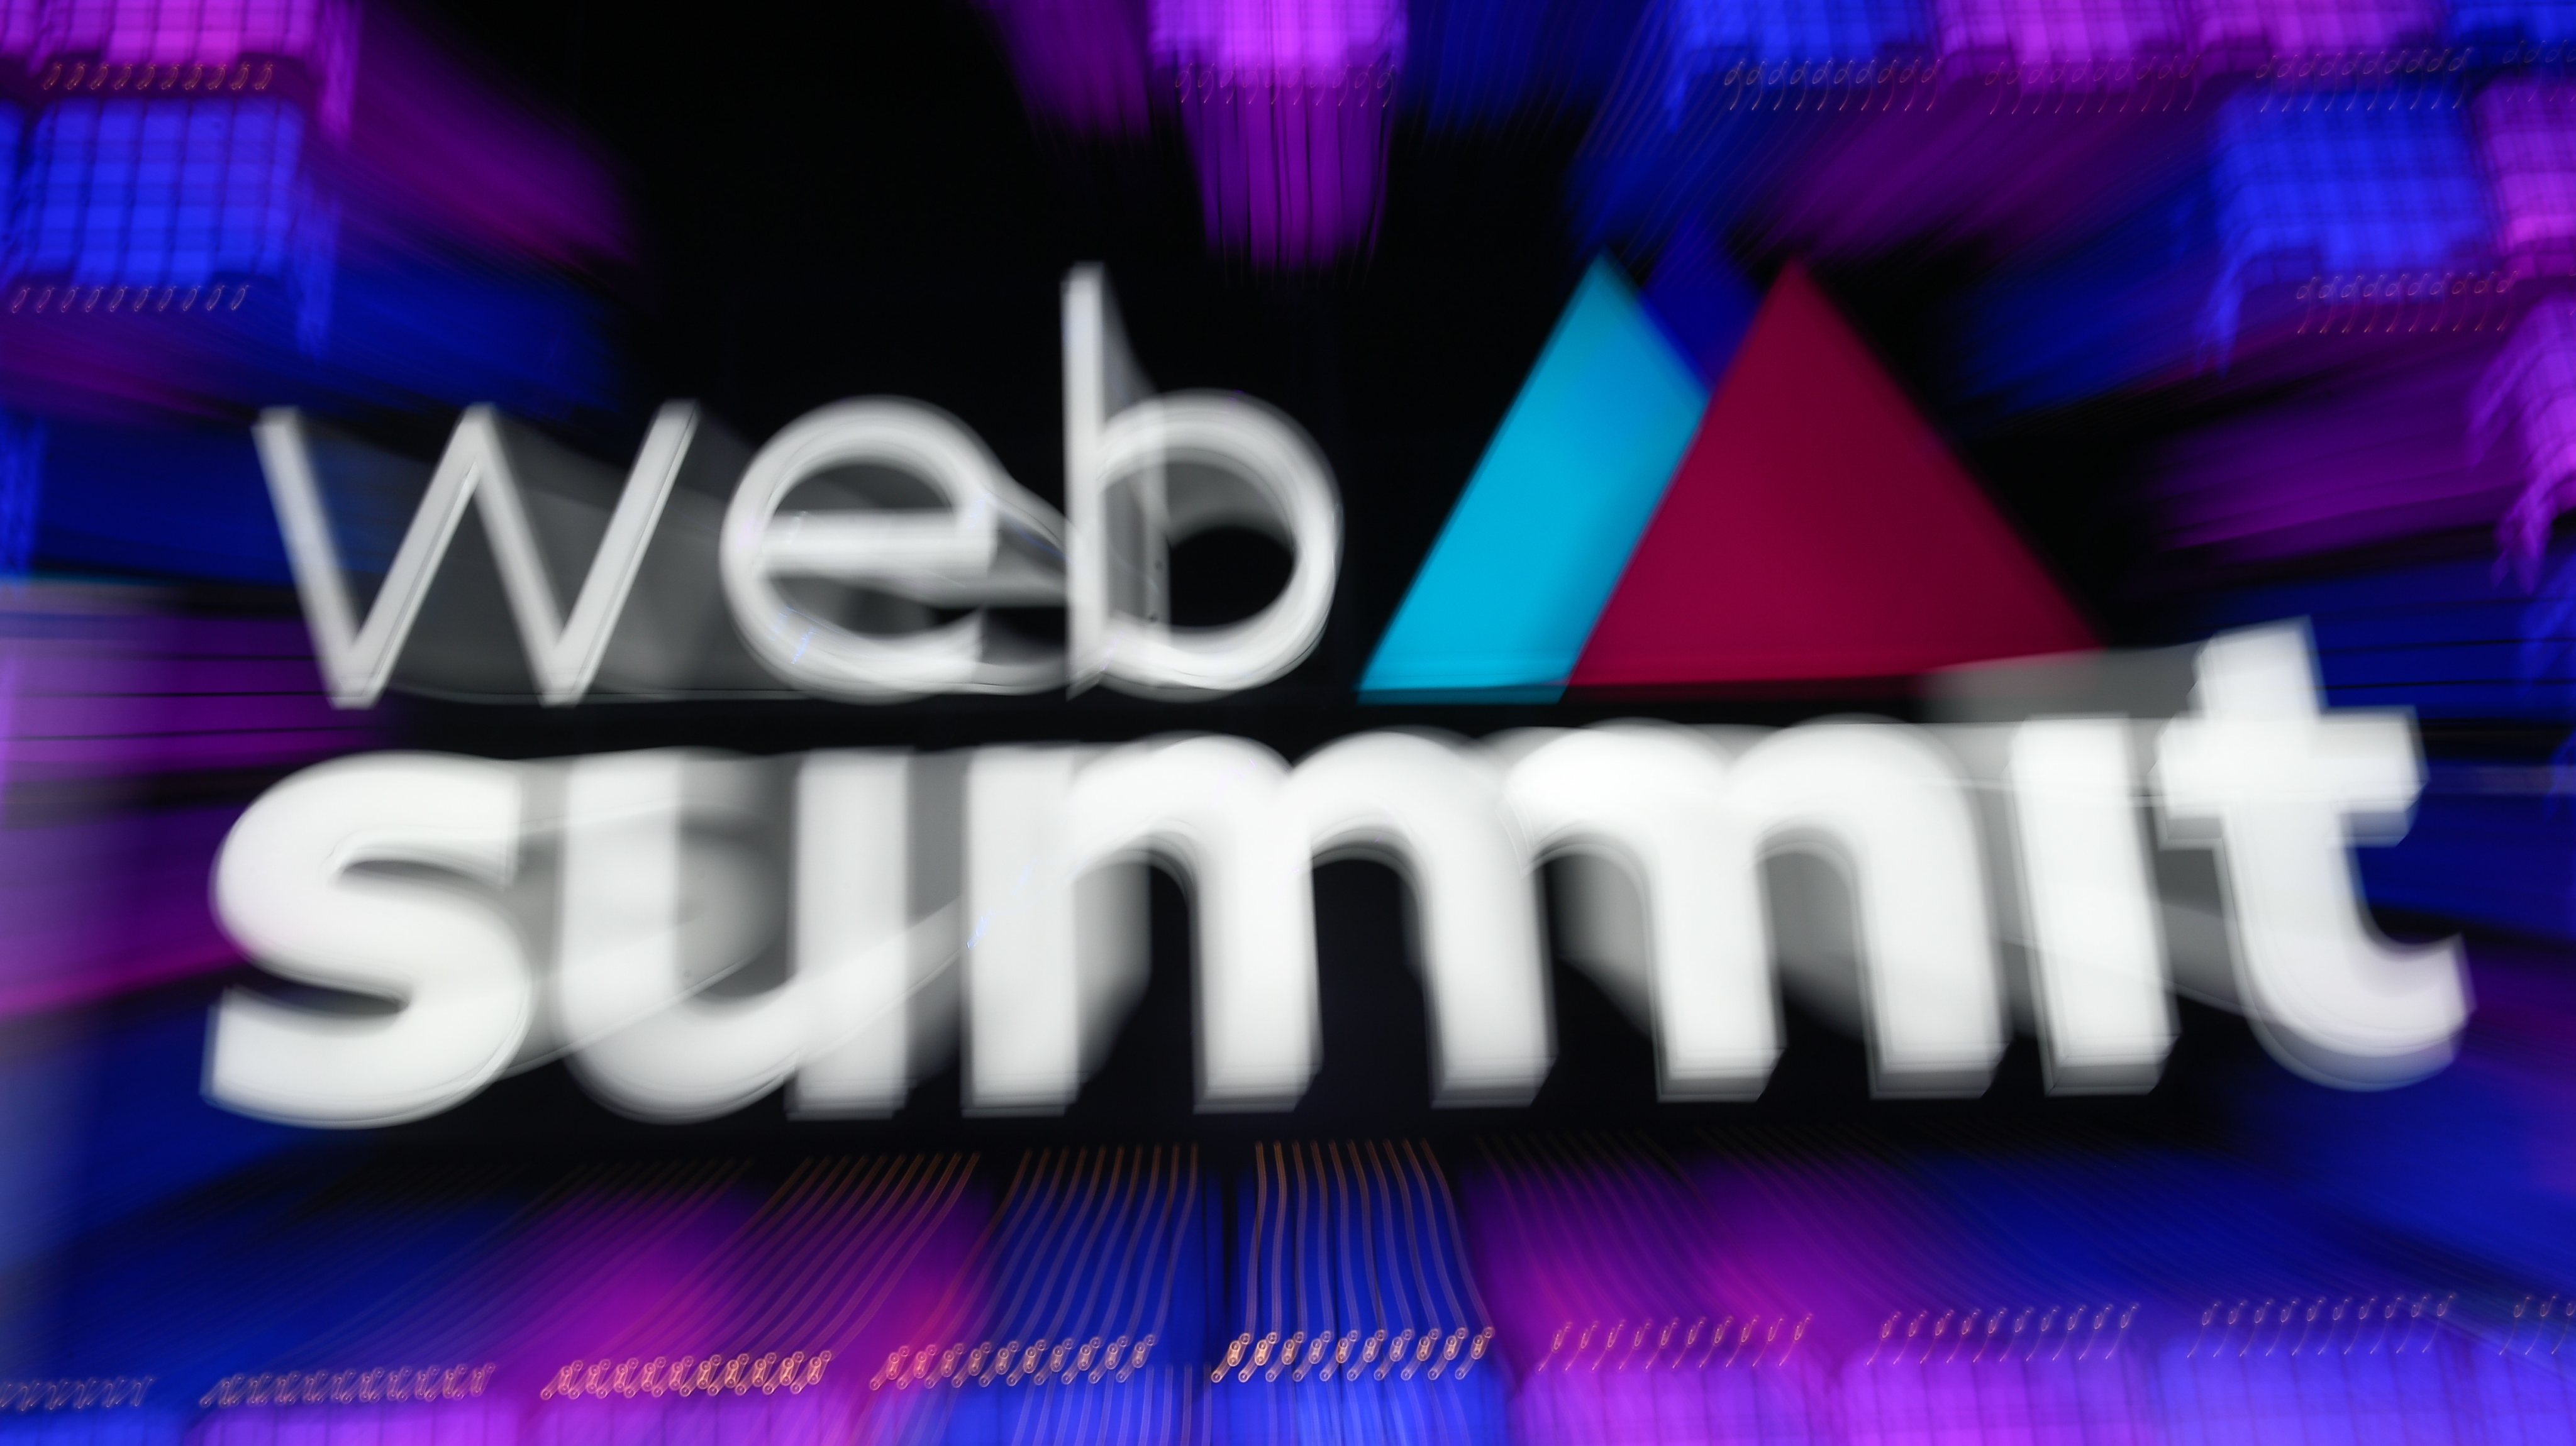 Web Summit logo is seen during the last day of the Web